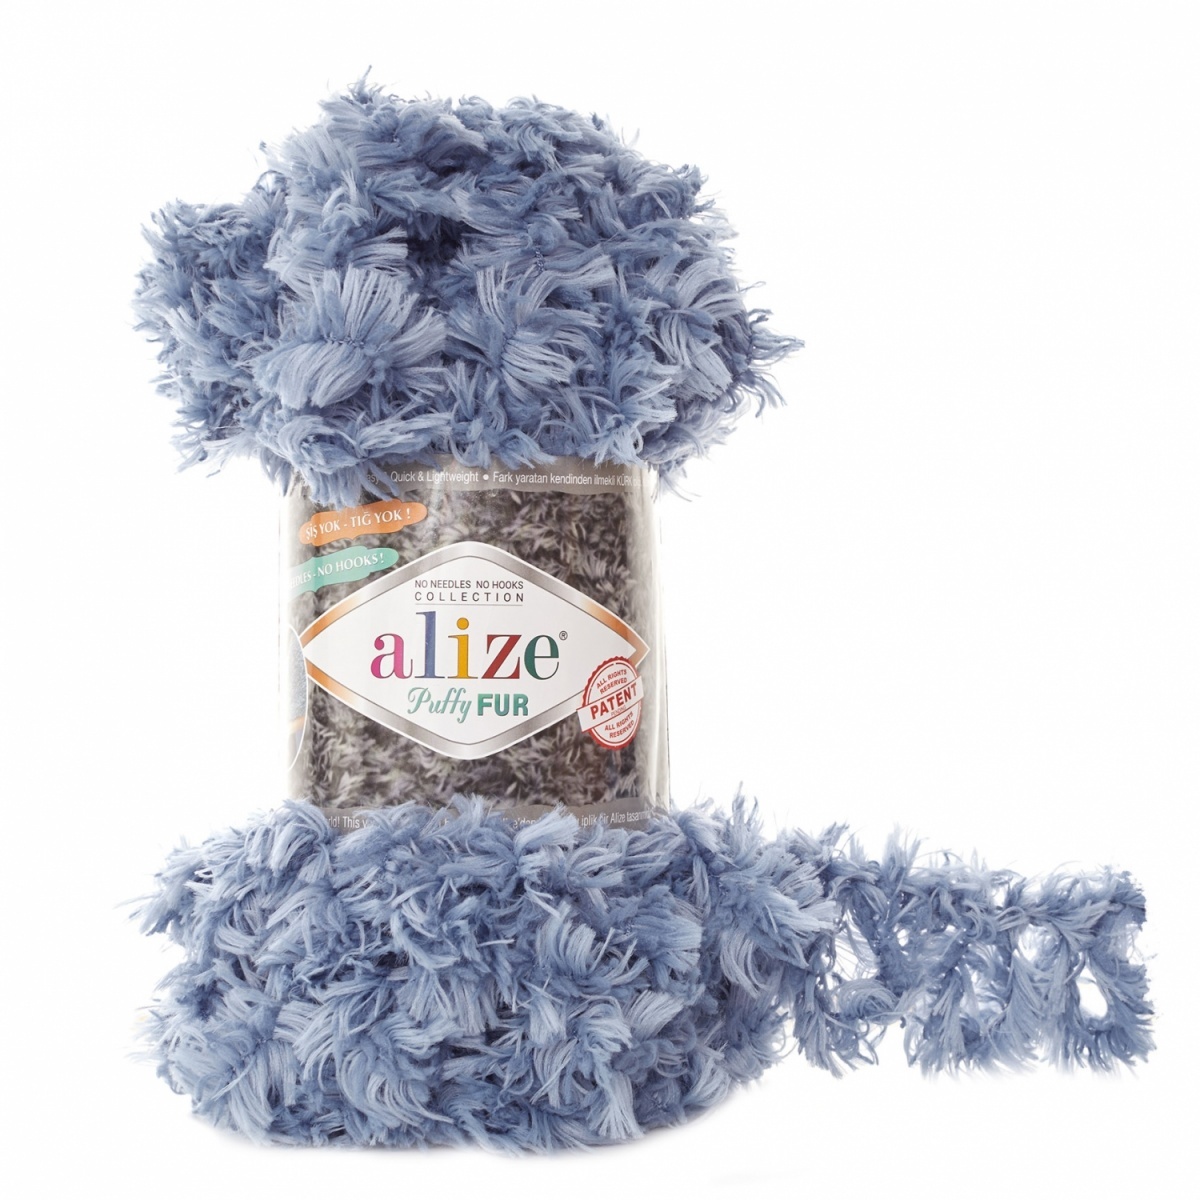 Alize Puffy Fur, 100% Polyester 5 Skein Value Pack, 500g фото 7